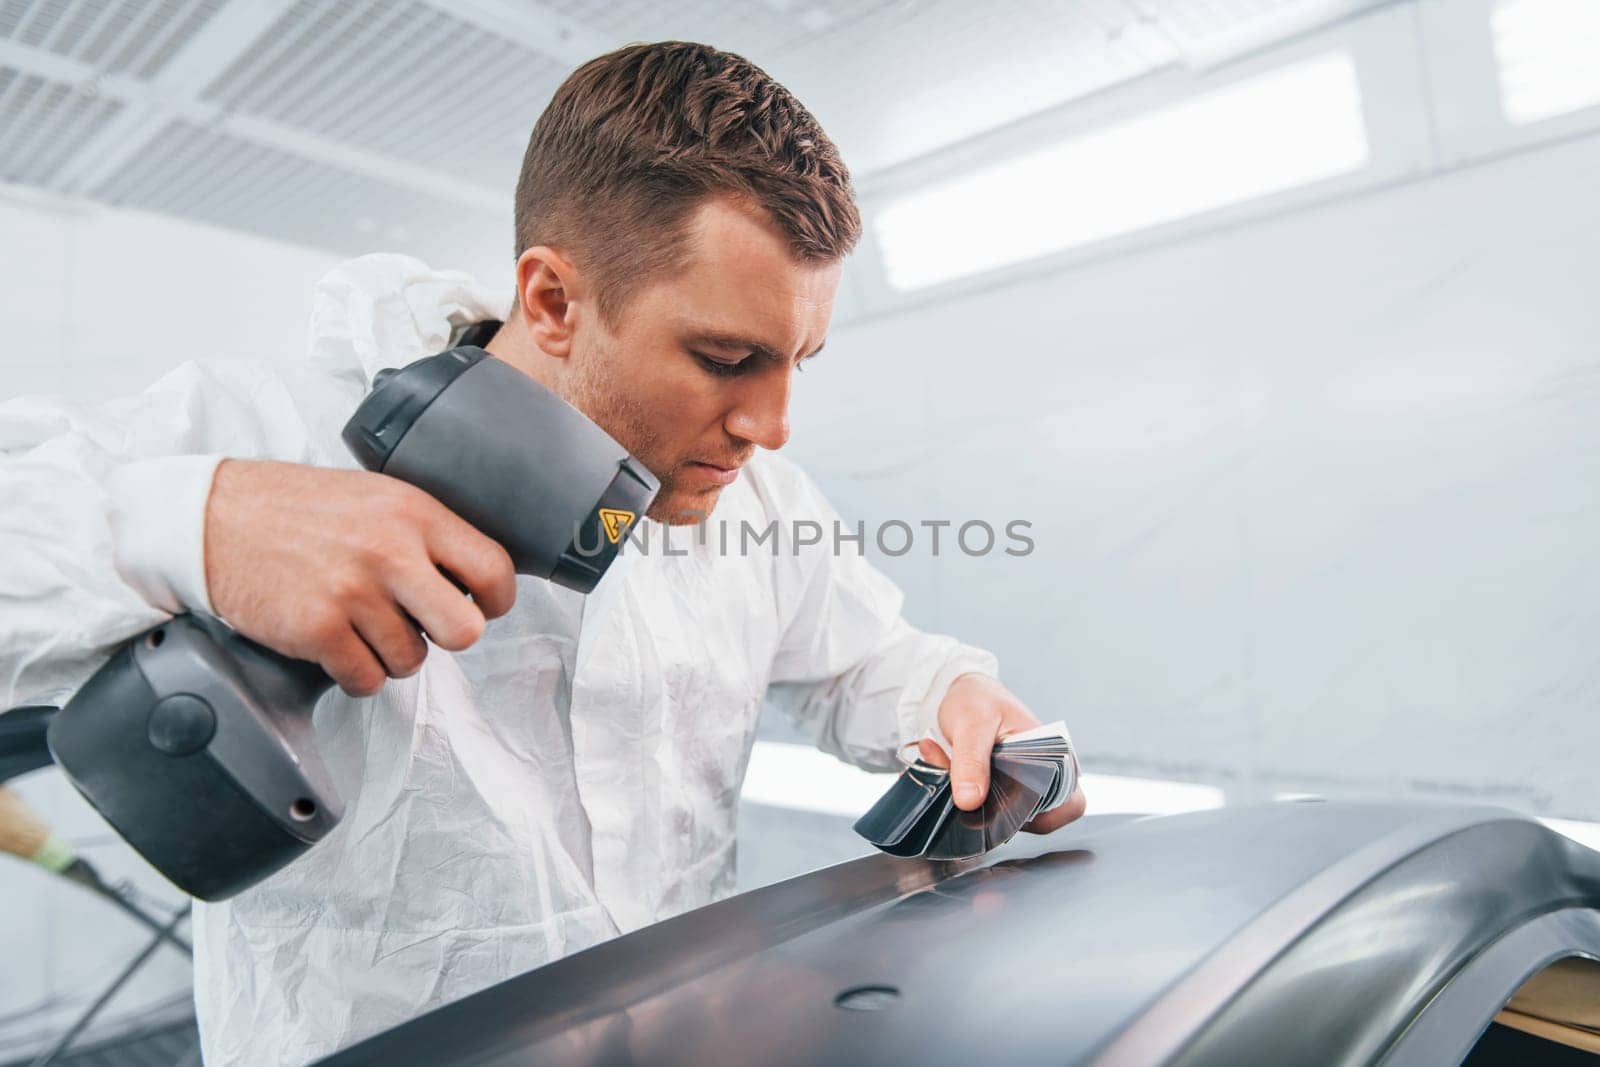 Working with car surface. Man in uniform is working in the auto service by Standret